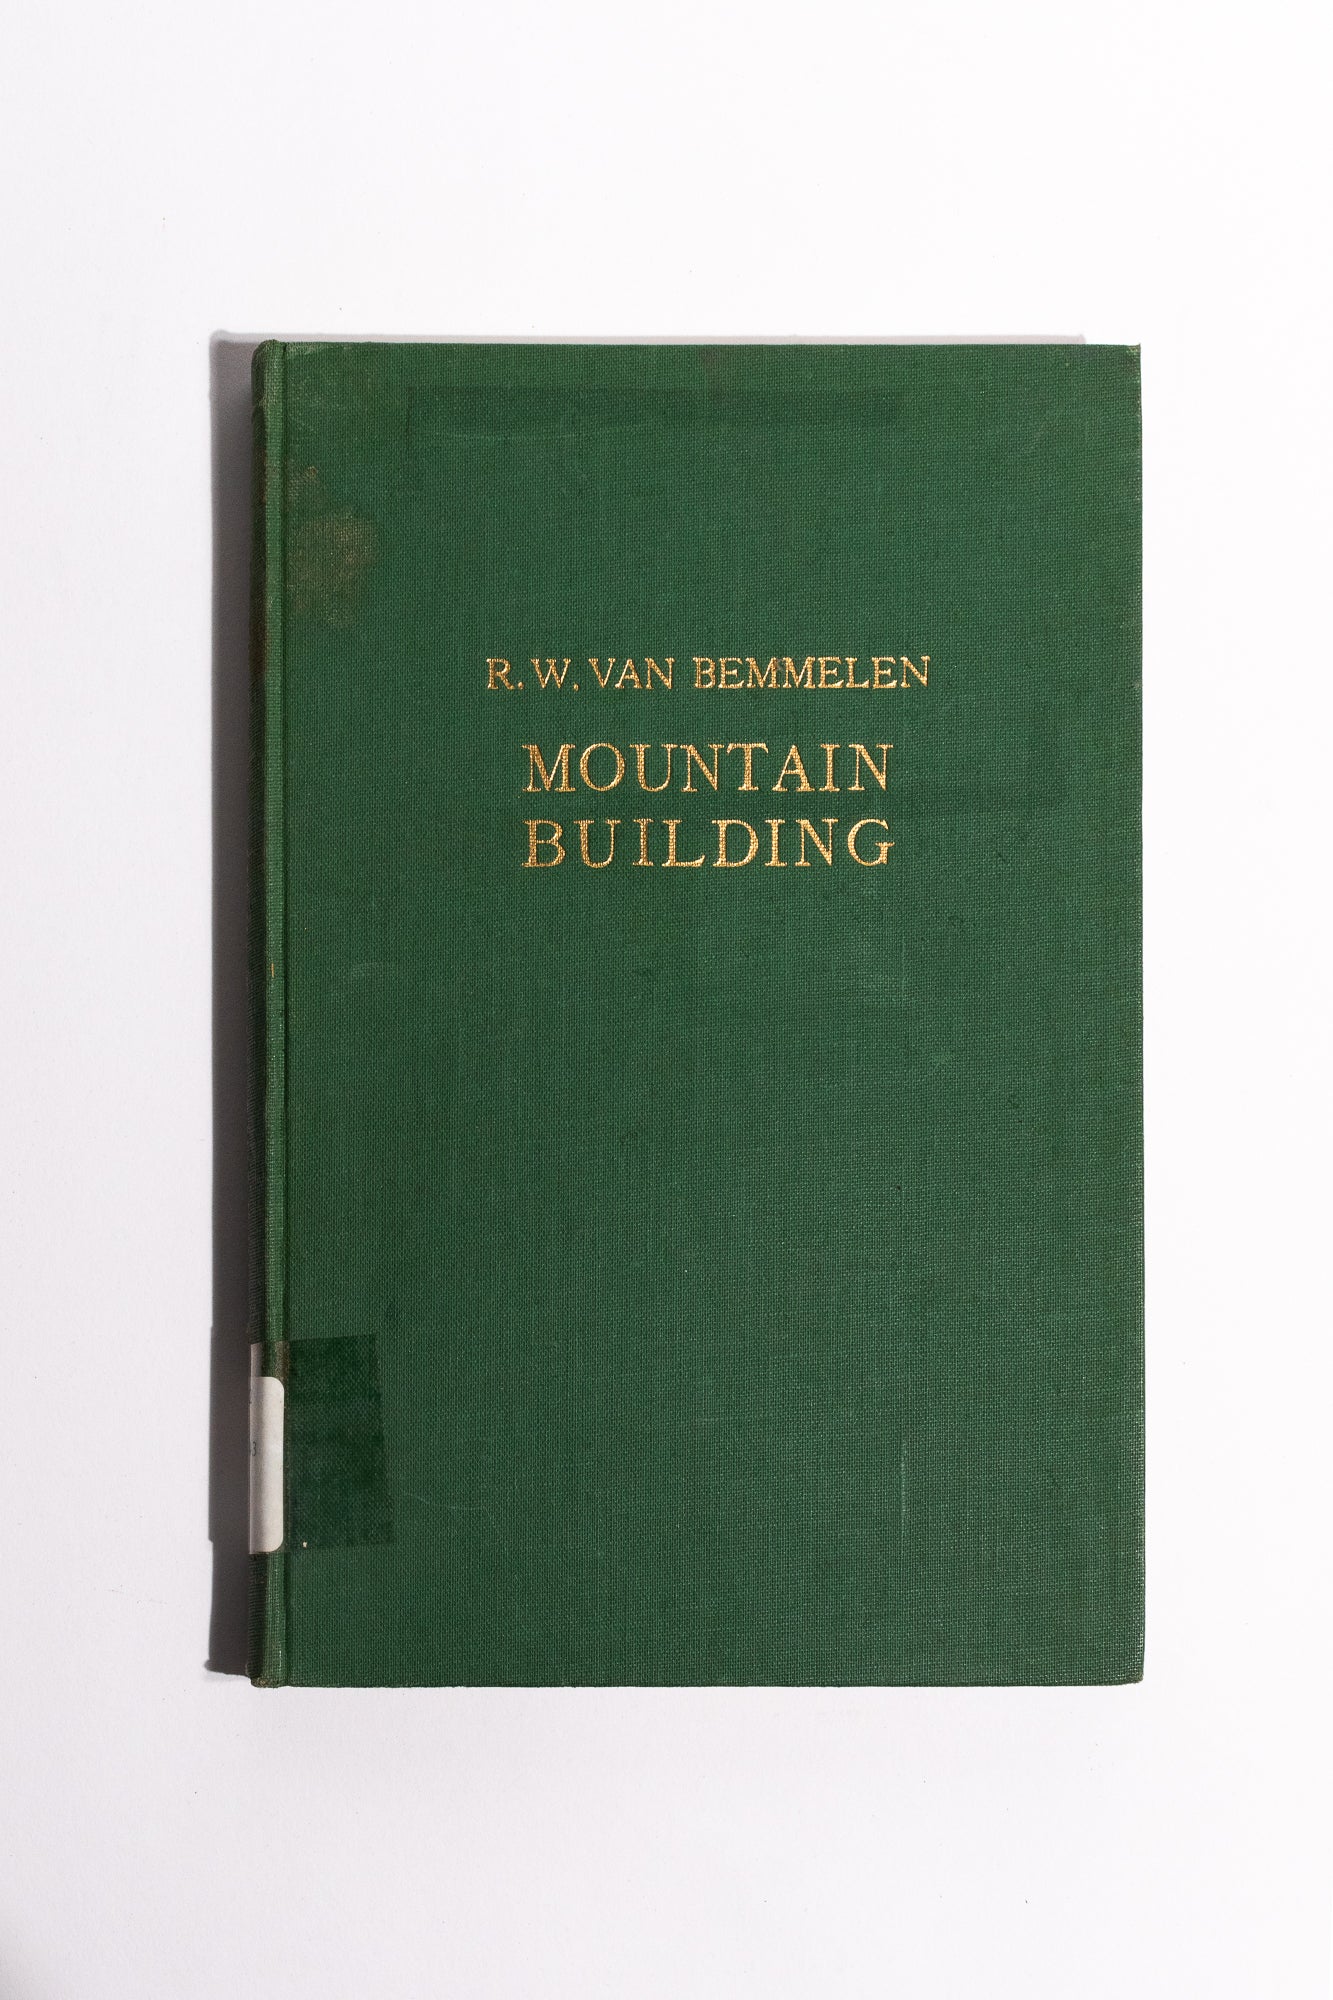 Mountain Building: A Study Primarily Based on Indonesia Region of the World's Most Active Crustal Deformations - Stemcell Science Shop